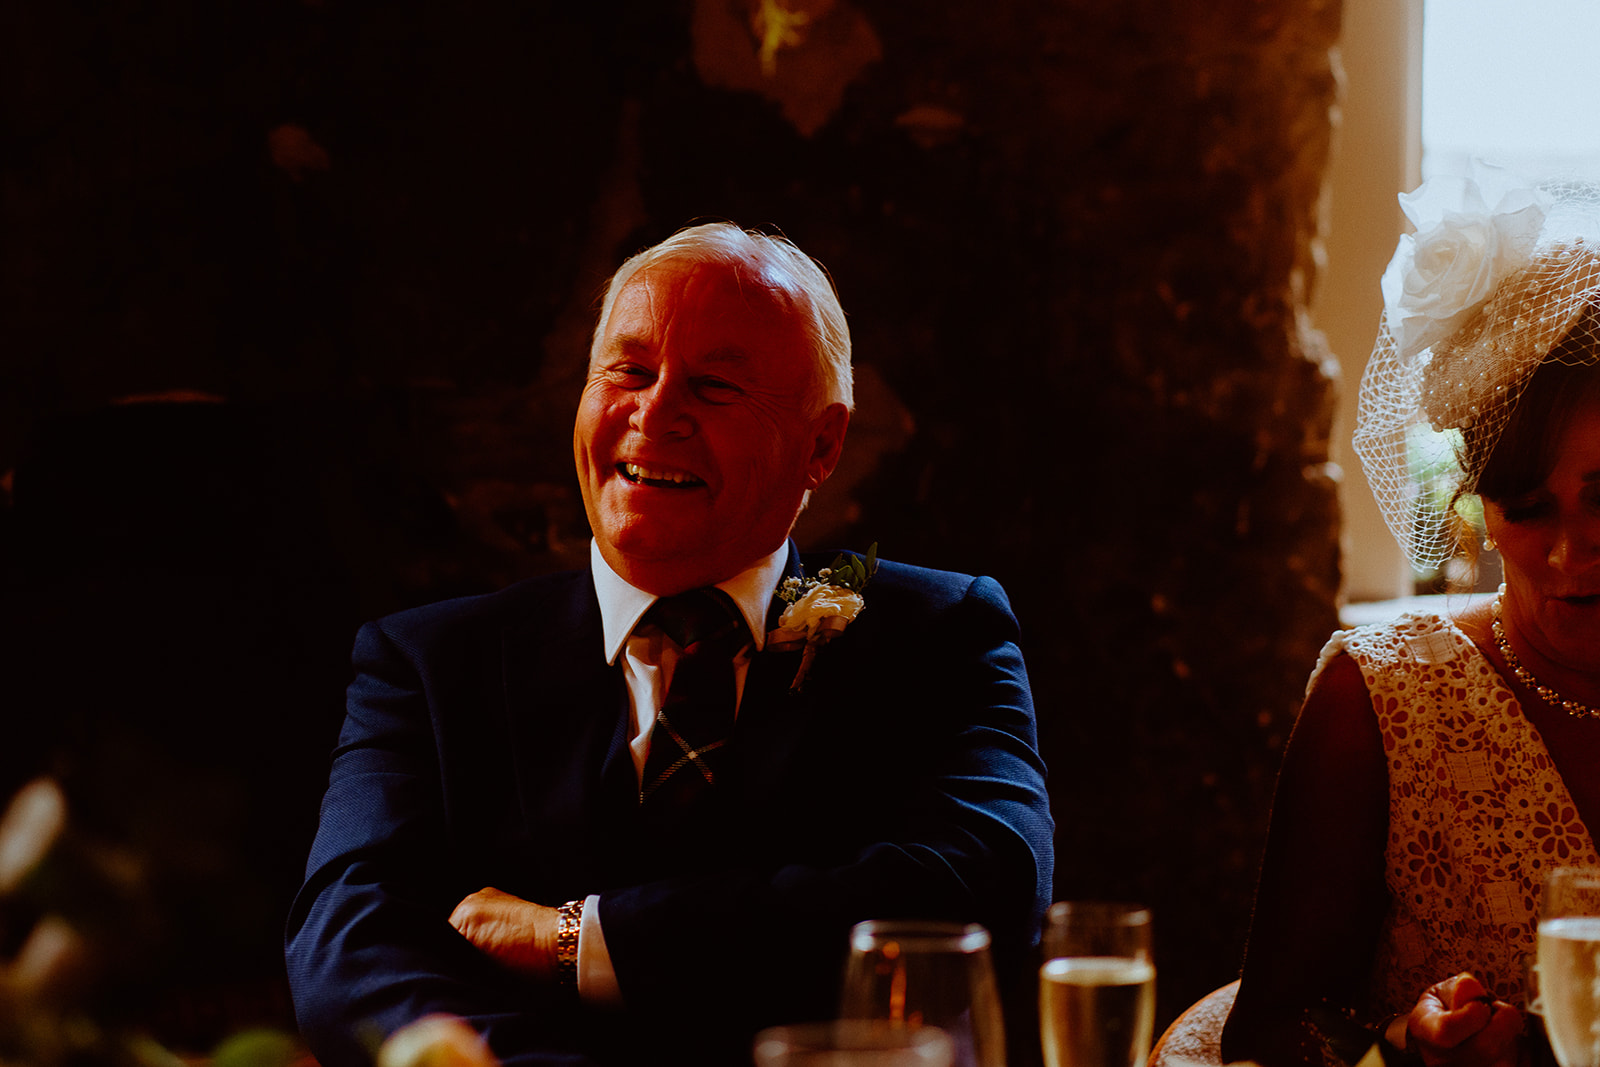 Bride's Father laughing